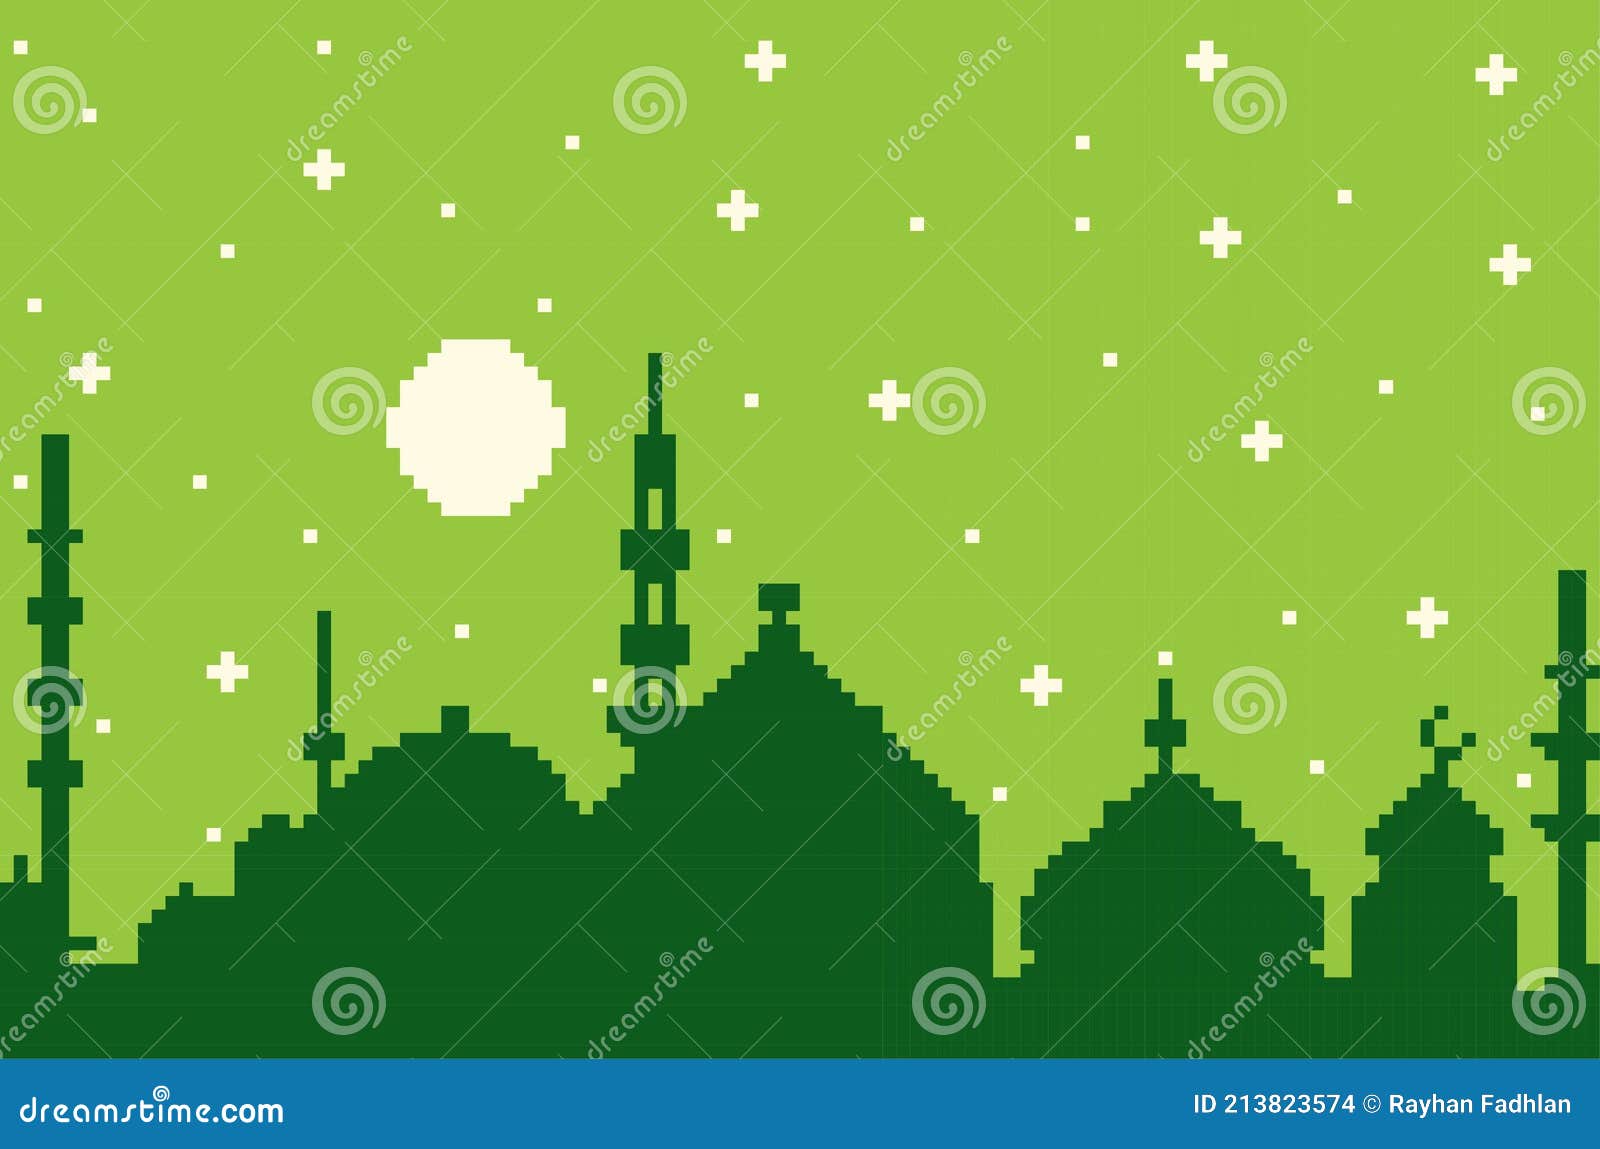 8 Bit Pixel  Art  With The Theme Of The Month Of Ramadan  